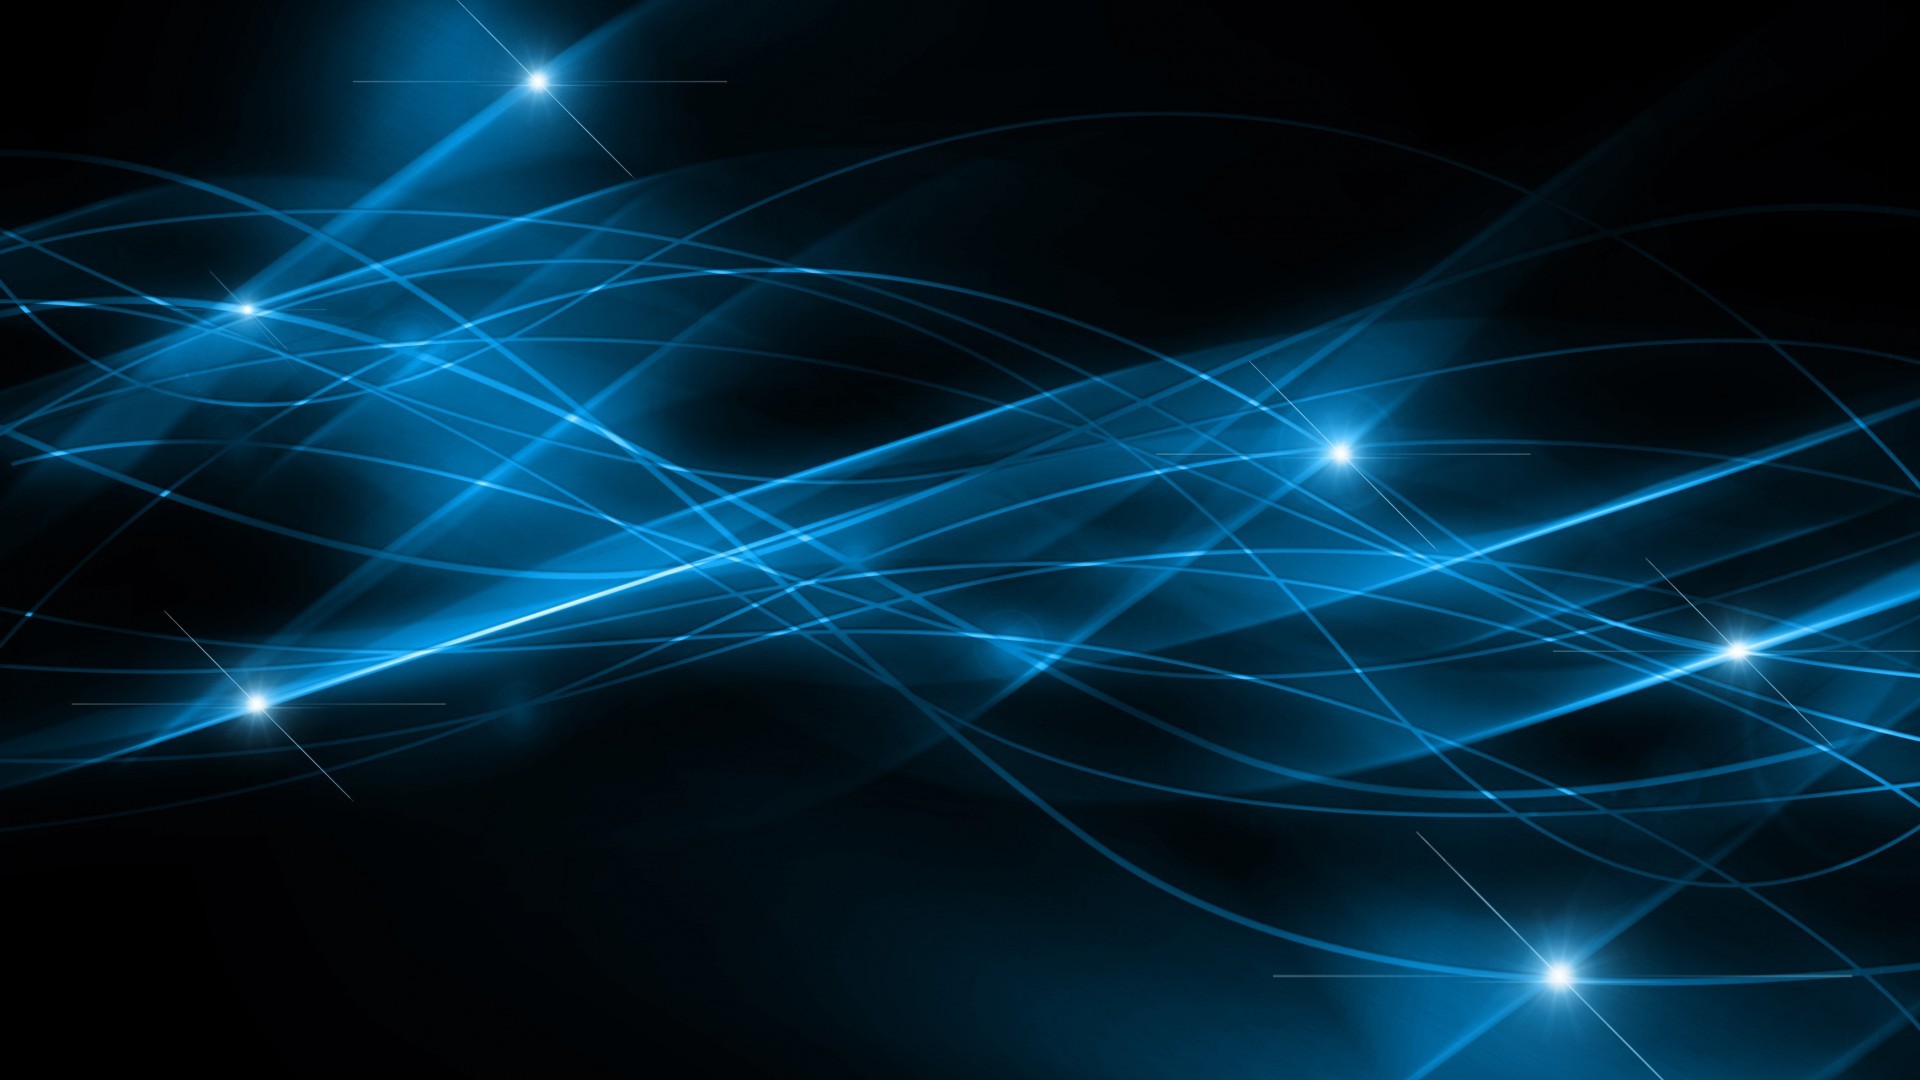 Dark Blue and Black Abstract Wallpaper